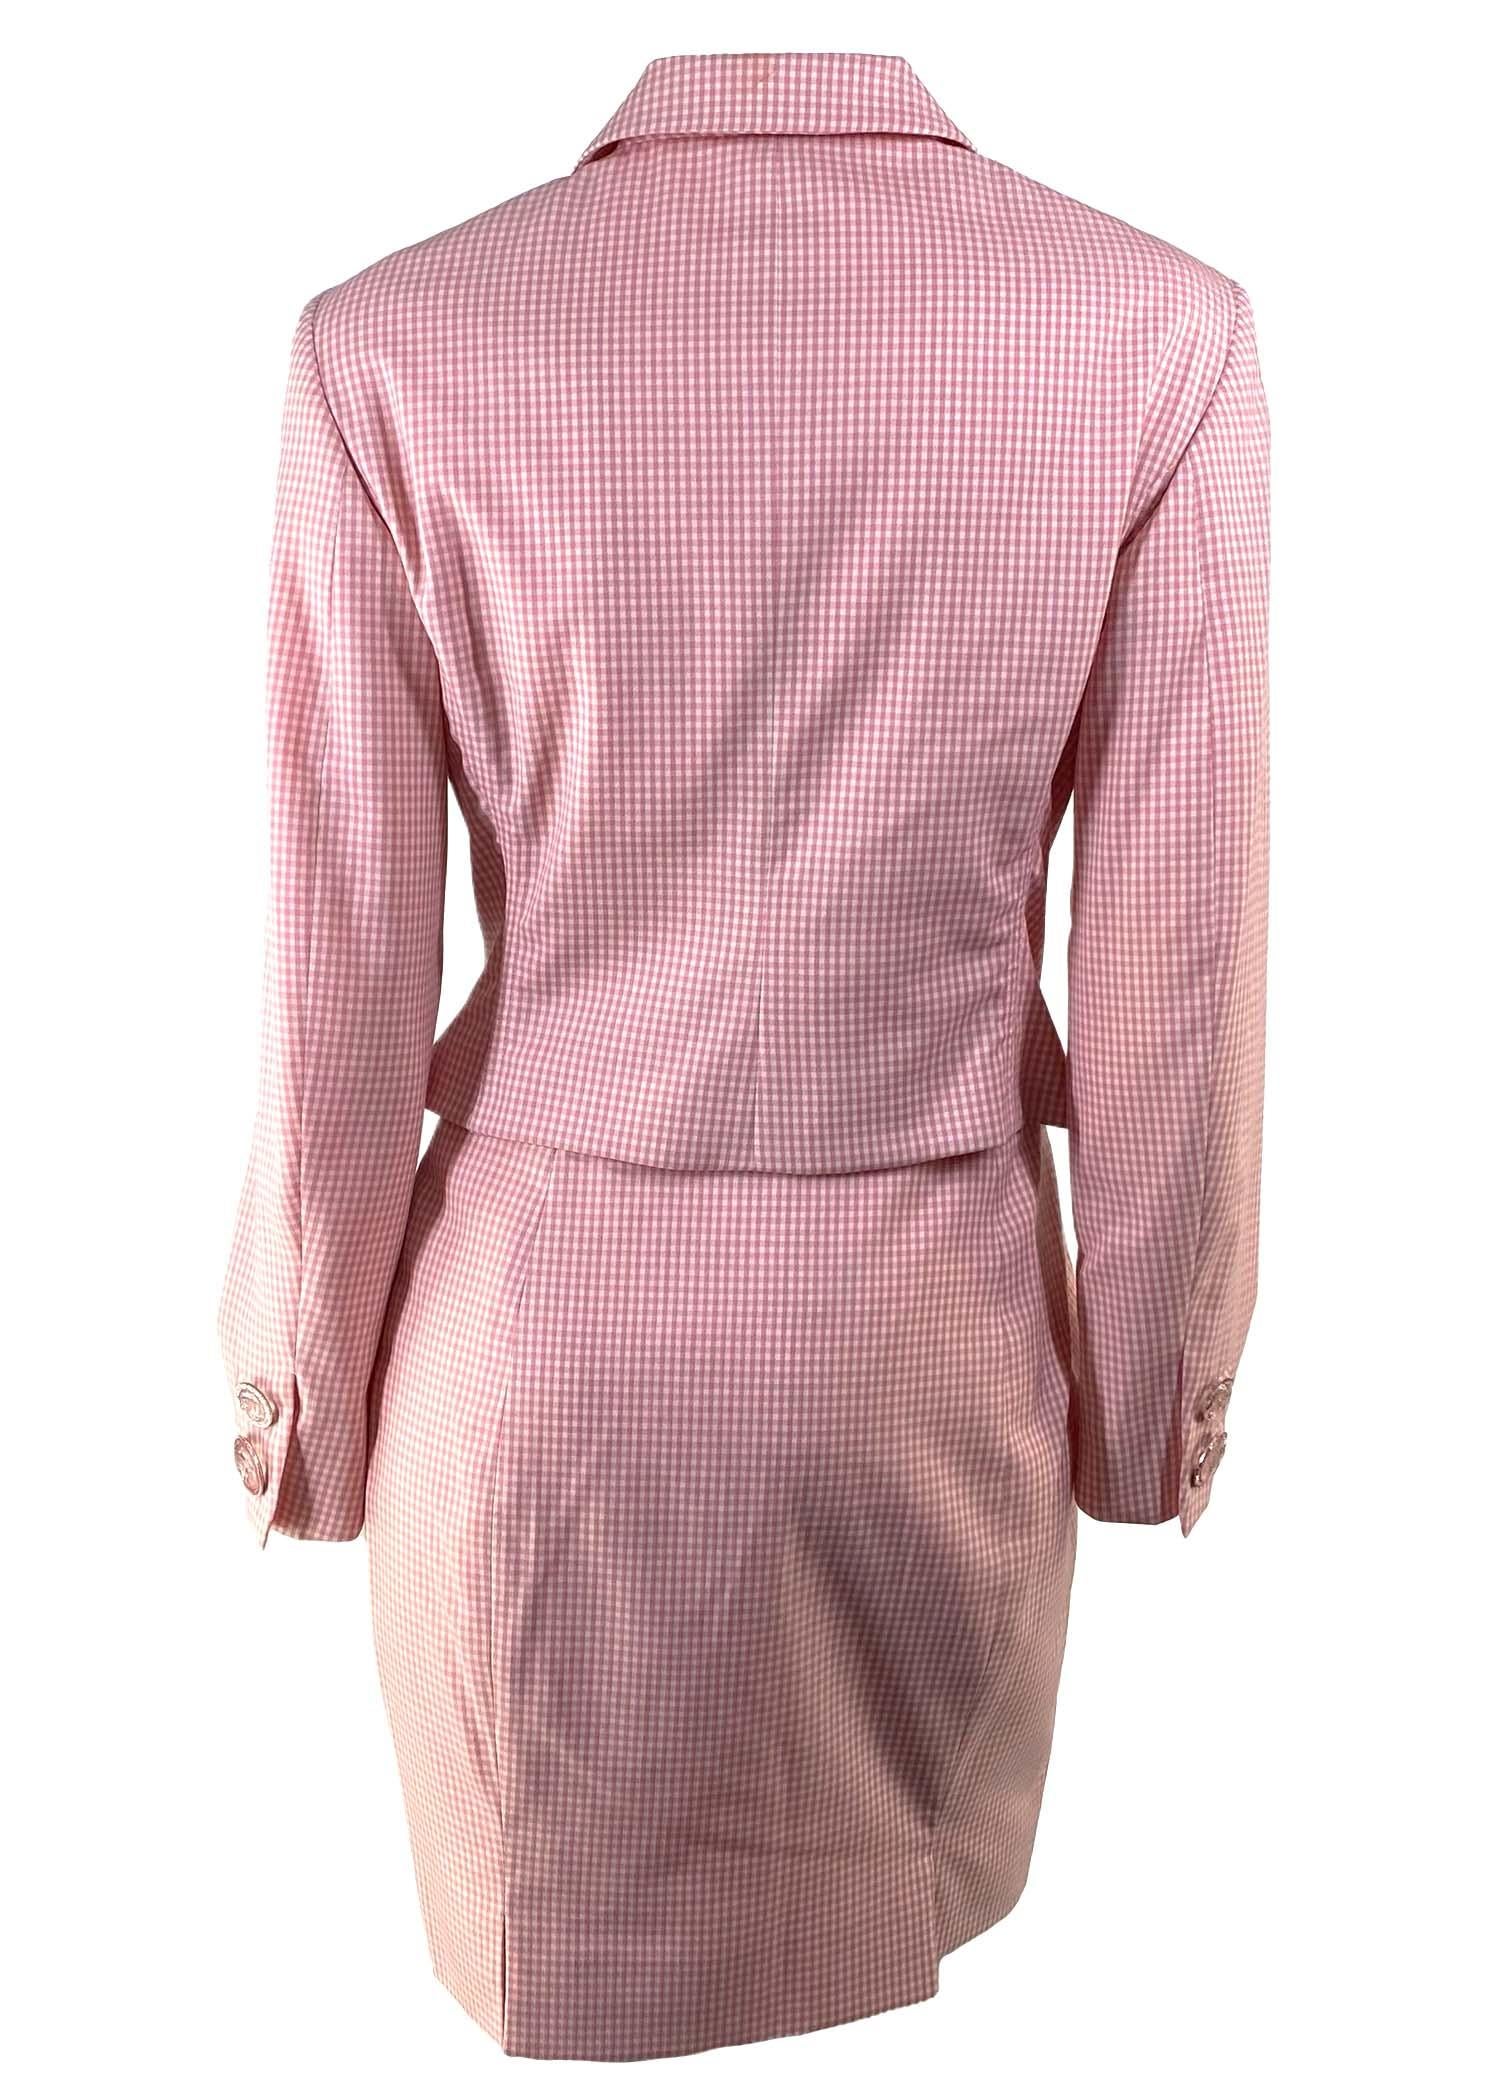 Brown S/S 1995 Gianni Versace Couture Runway Pink Gingham Runway Skirt Suit  For Sale